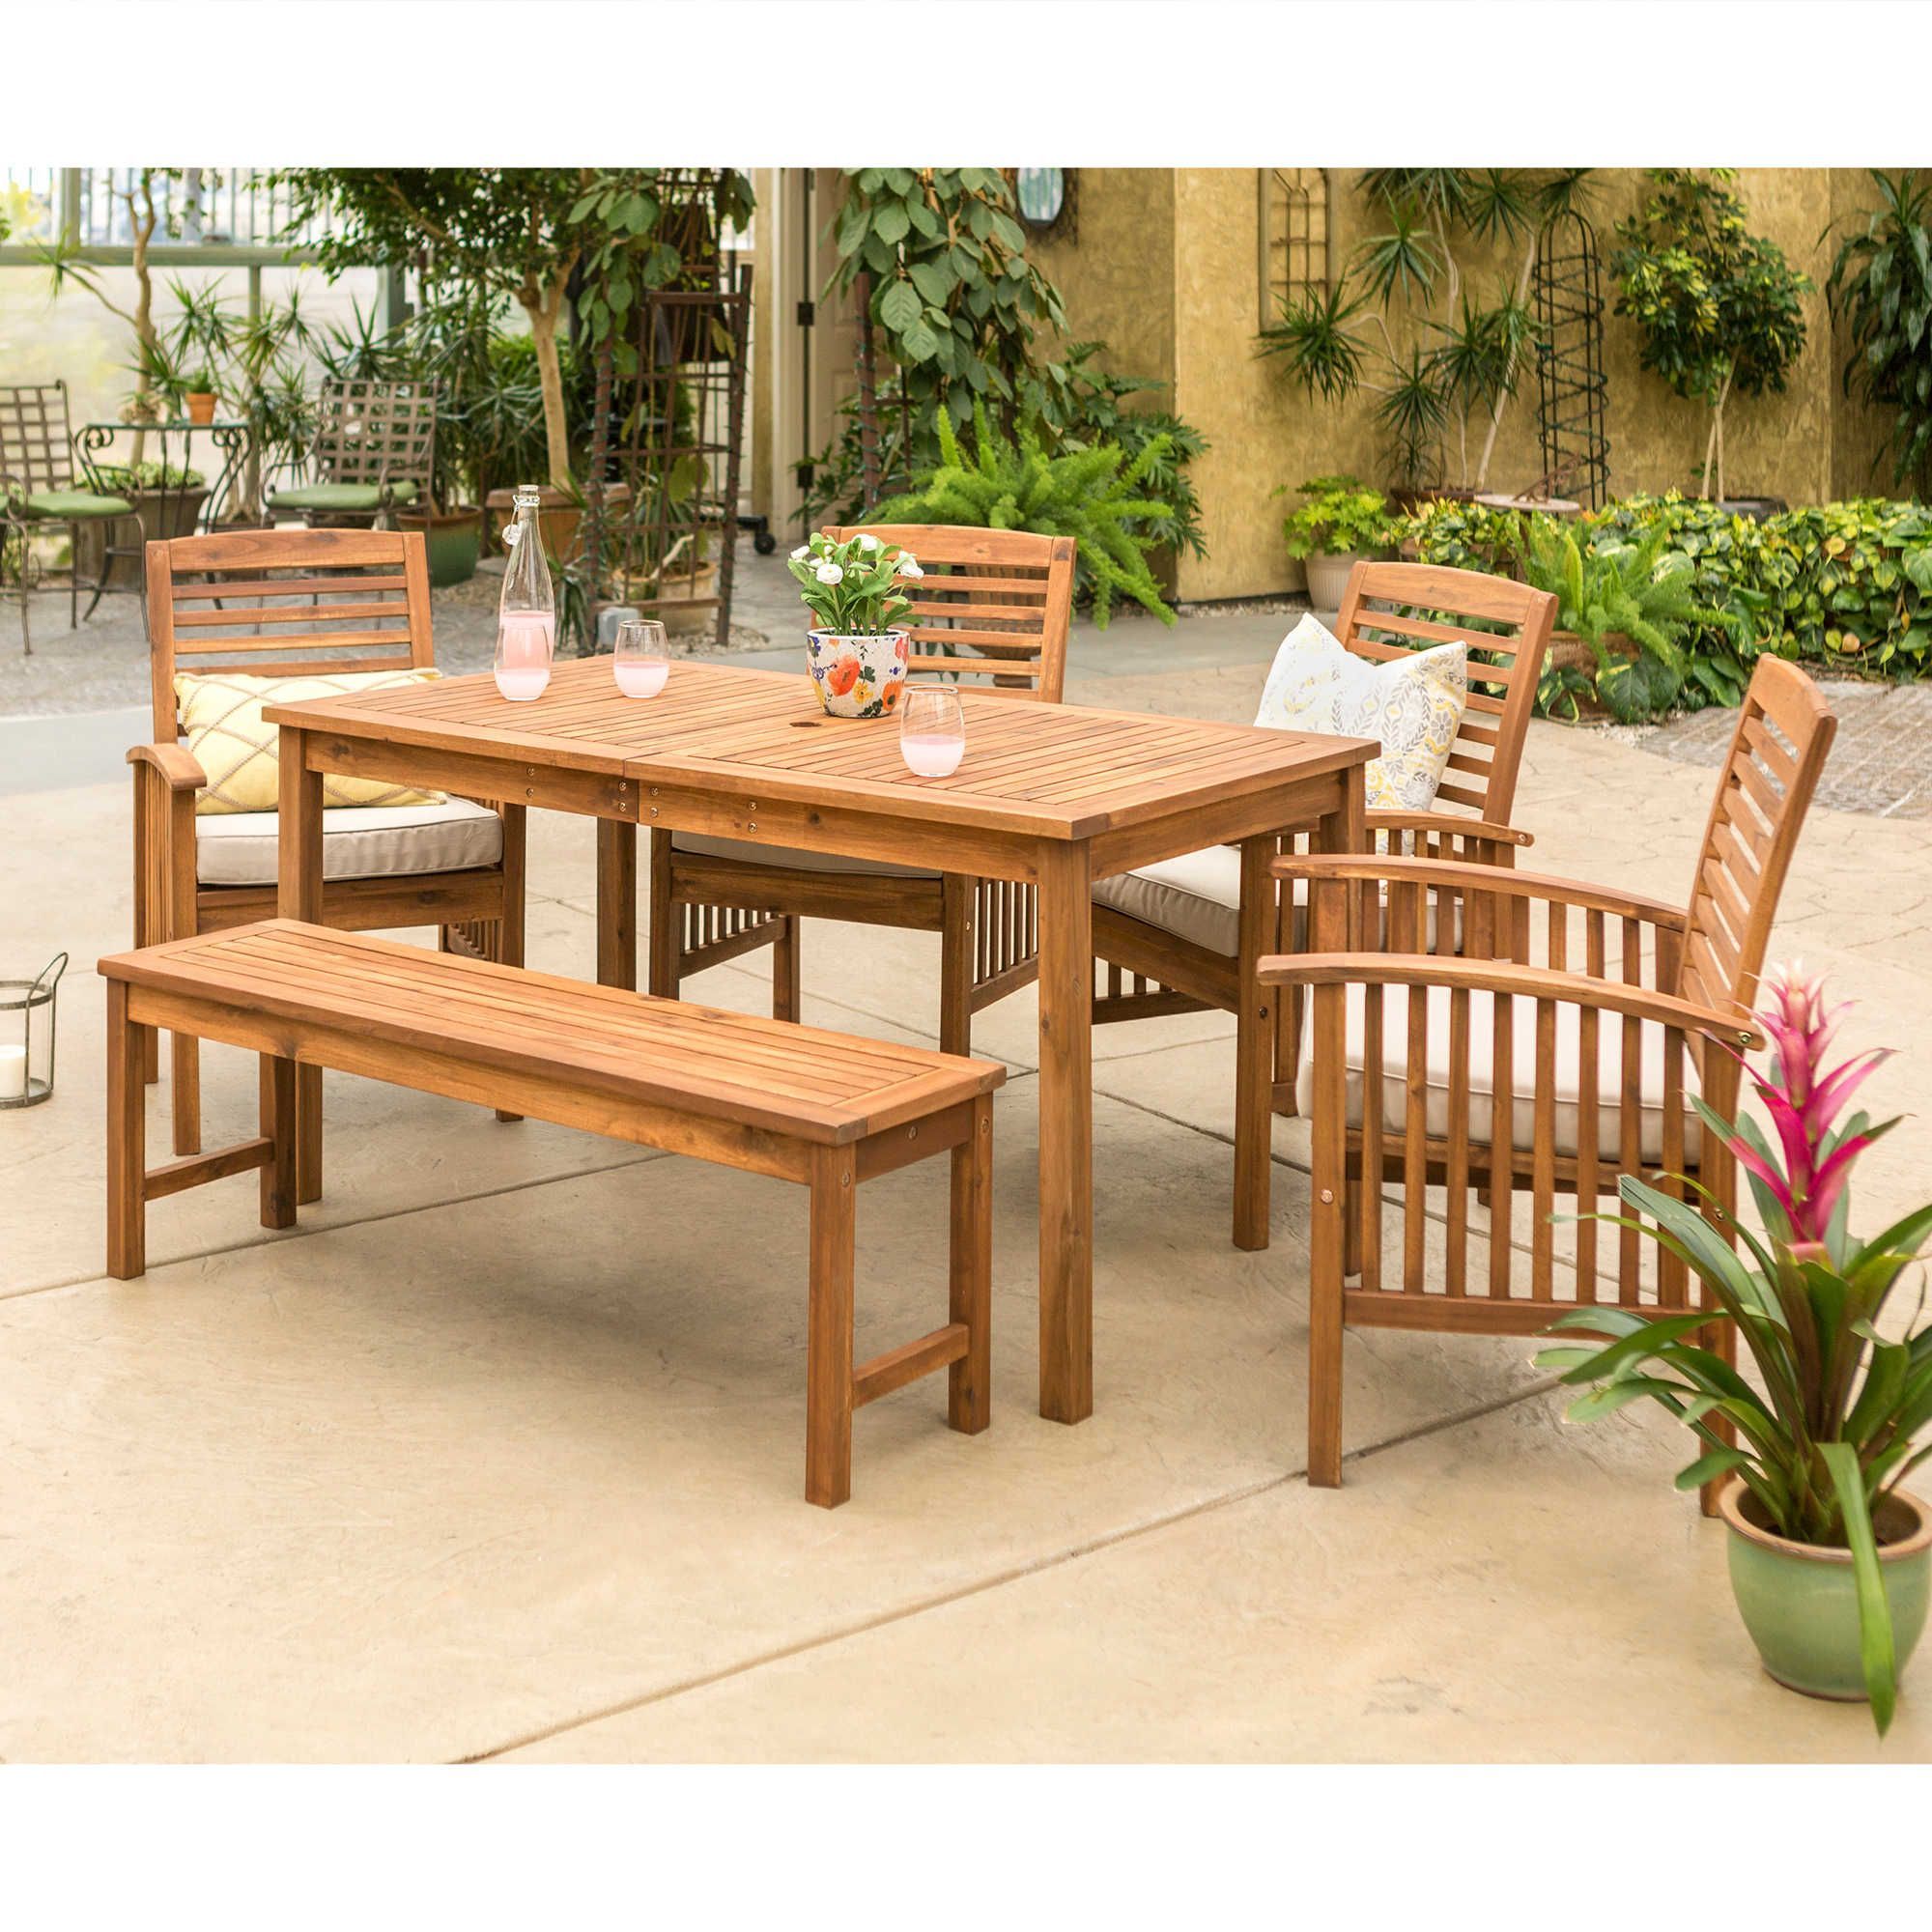 Walker Edison Forest Gate 6 Piece Acacia Wood Outdoor Dining Set Throughout Brown Acacia 6 Piece Patio Dining Sets (View 1 of 15)